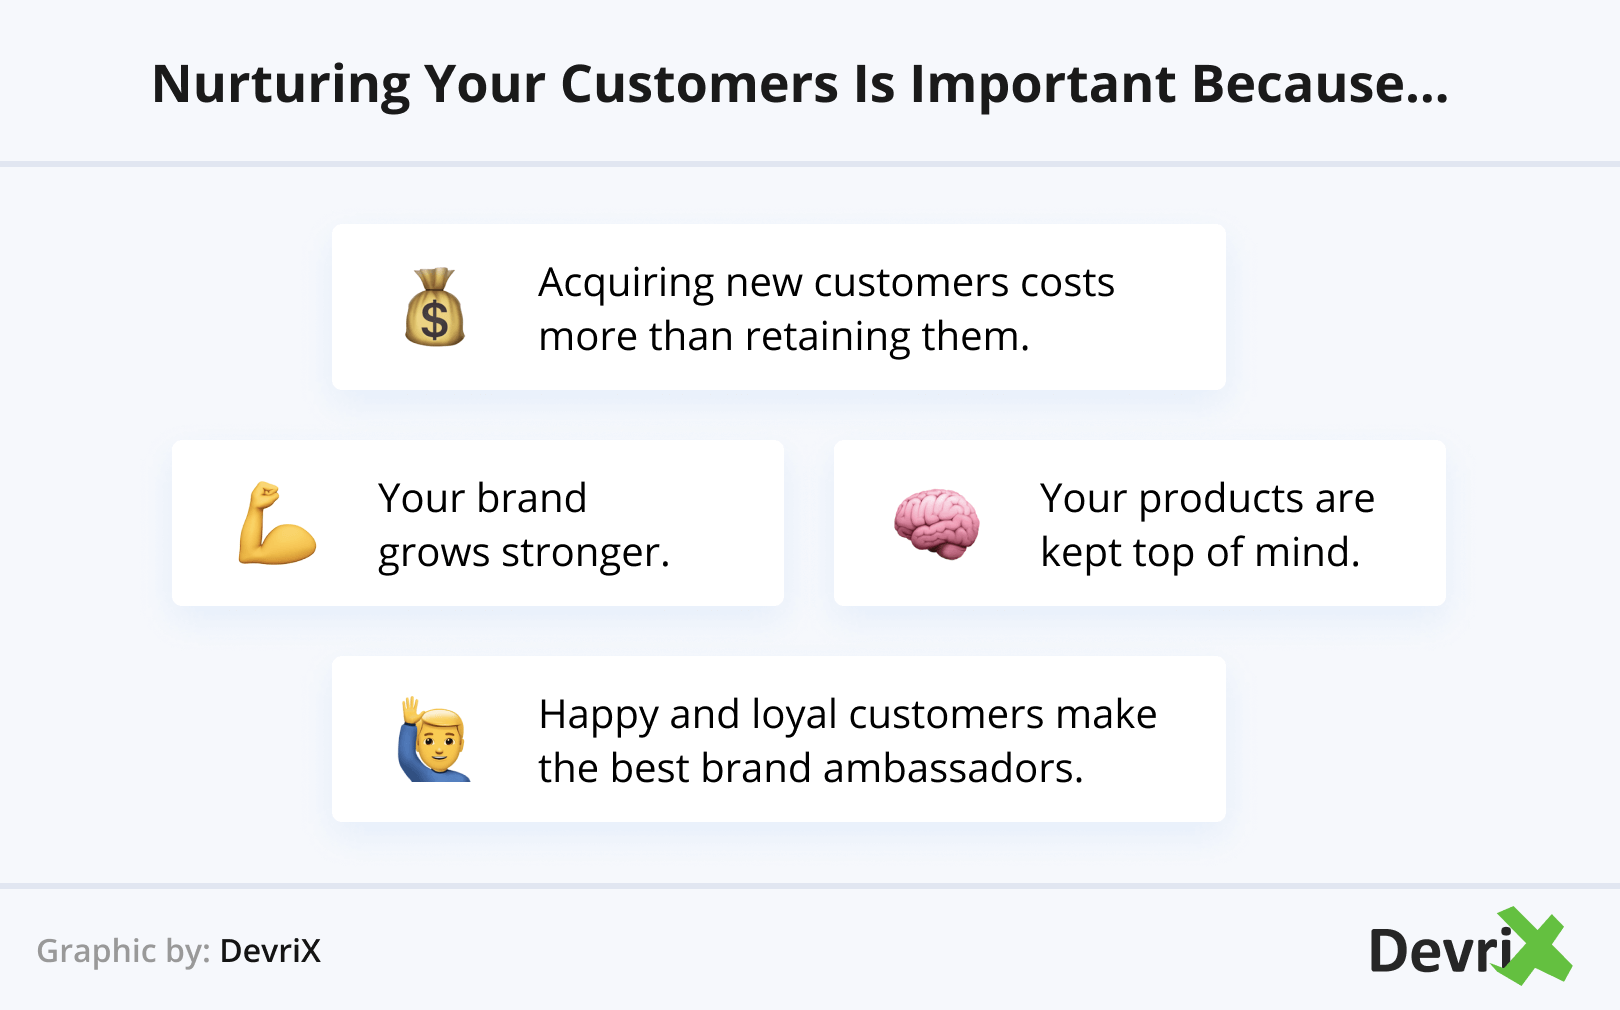 Nurturing Your Customers Is Important Because...